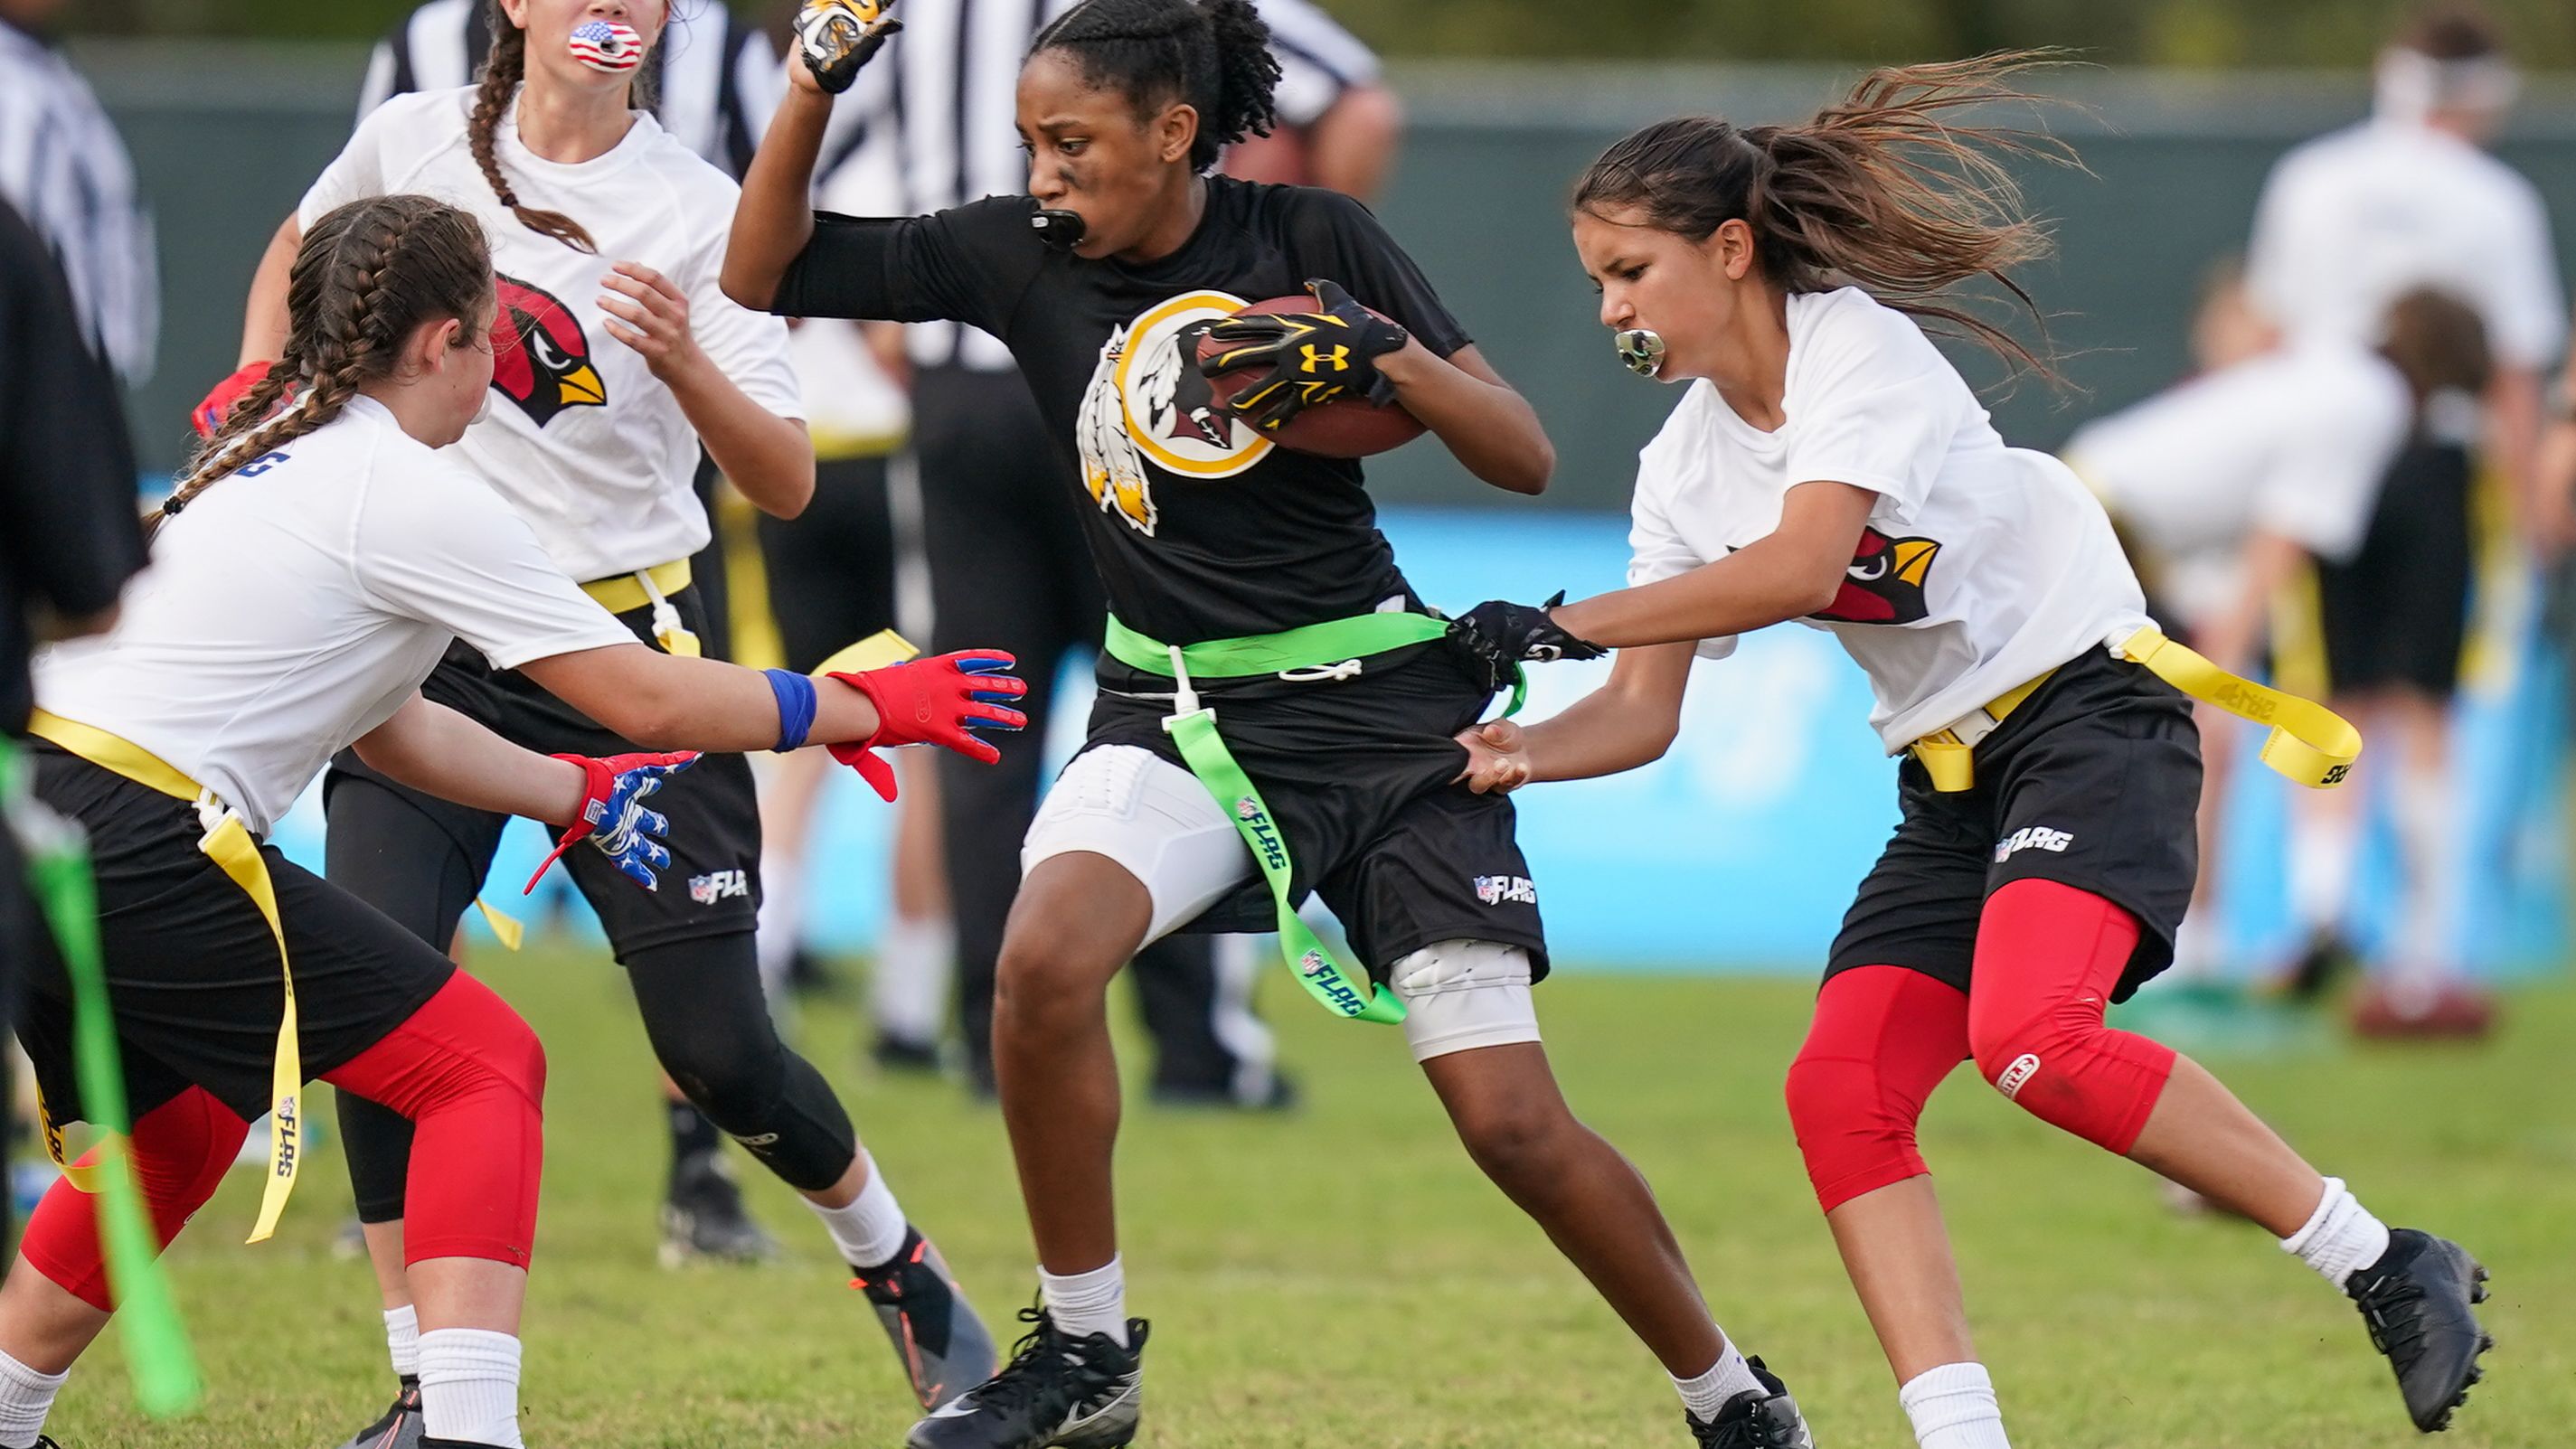 Players participate in the first day of games in the NFL Flag Football Championships.